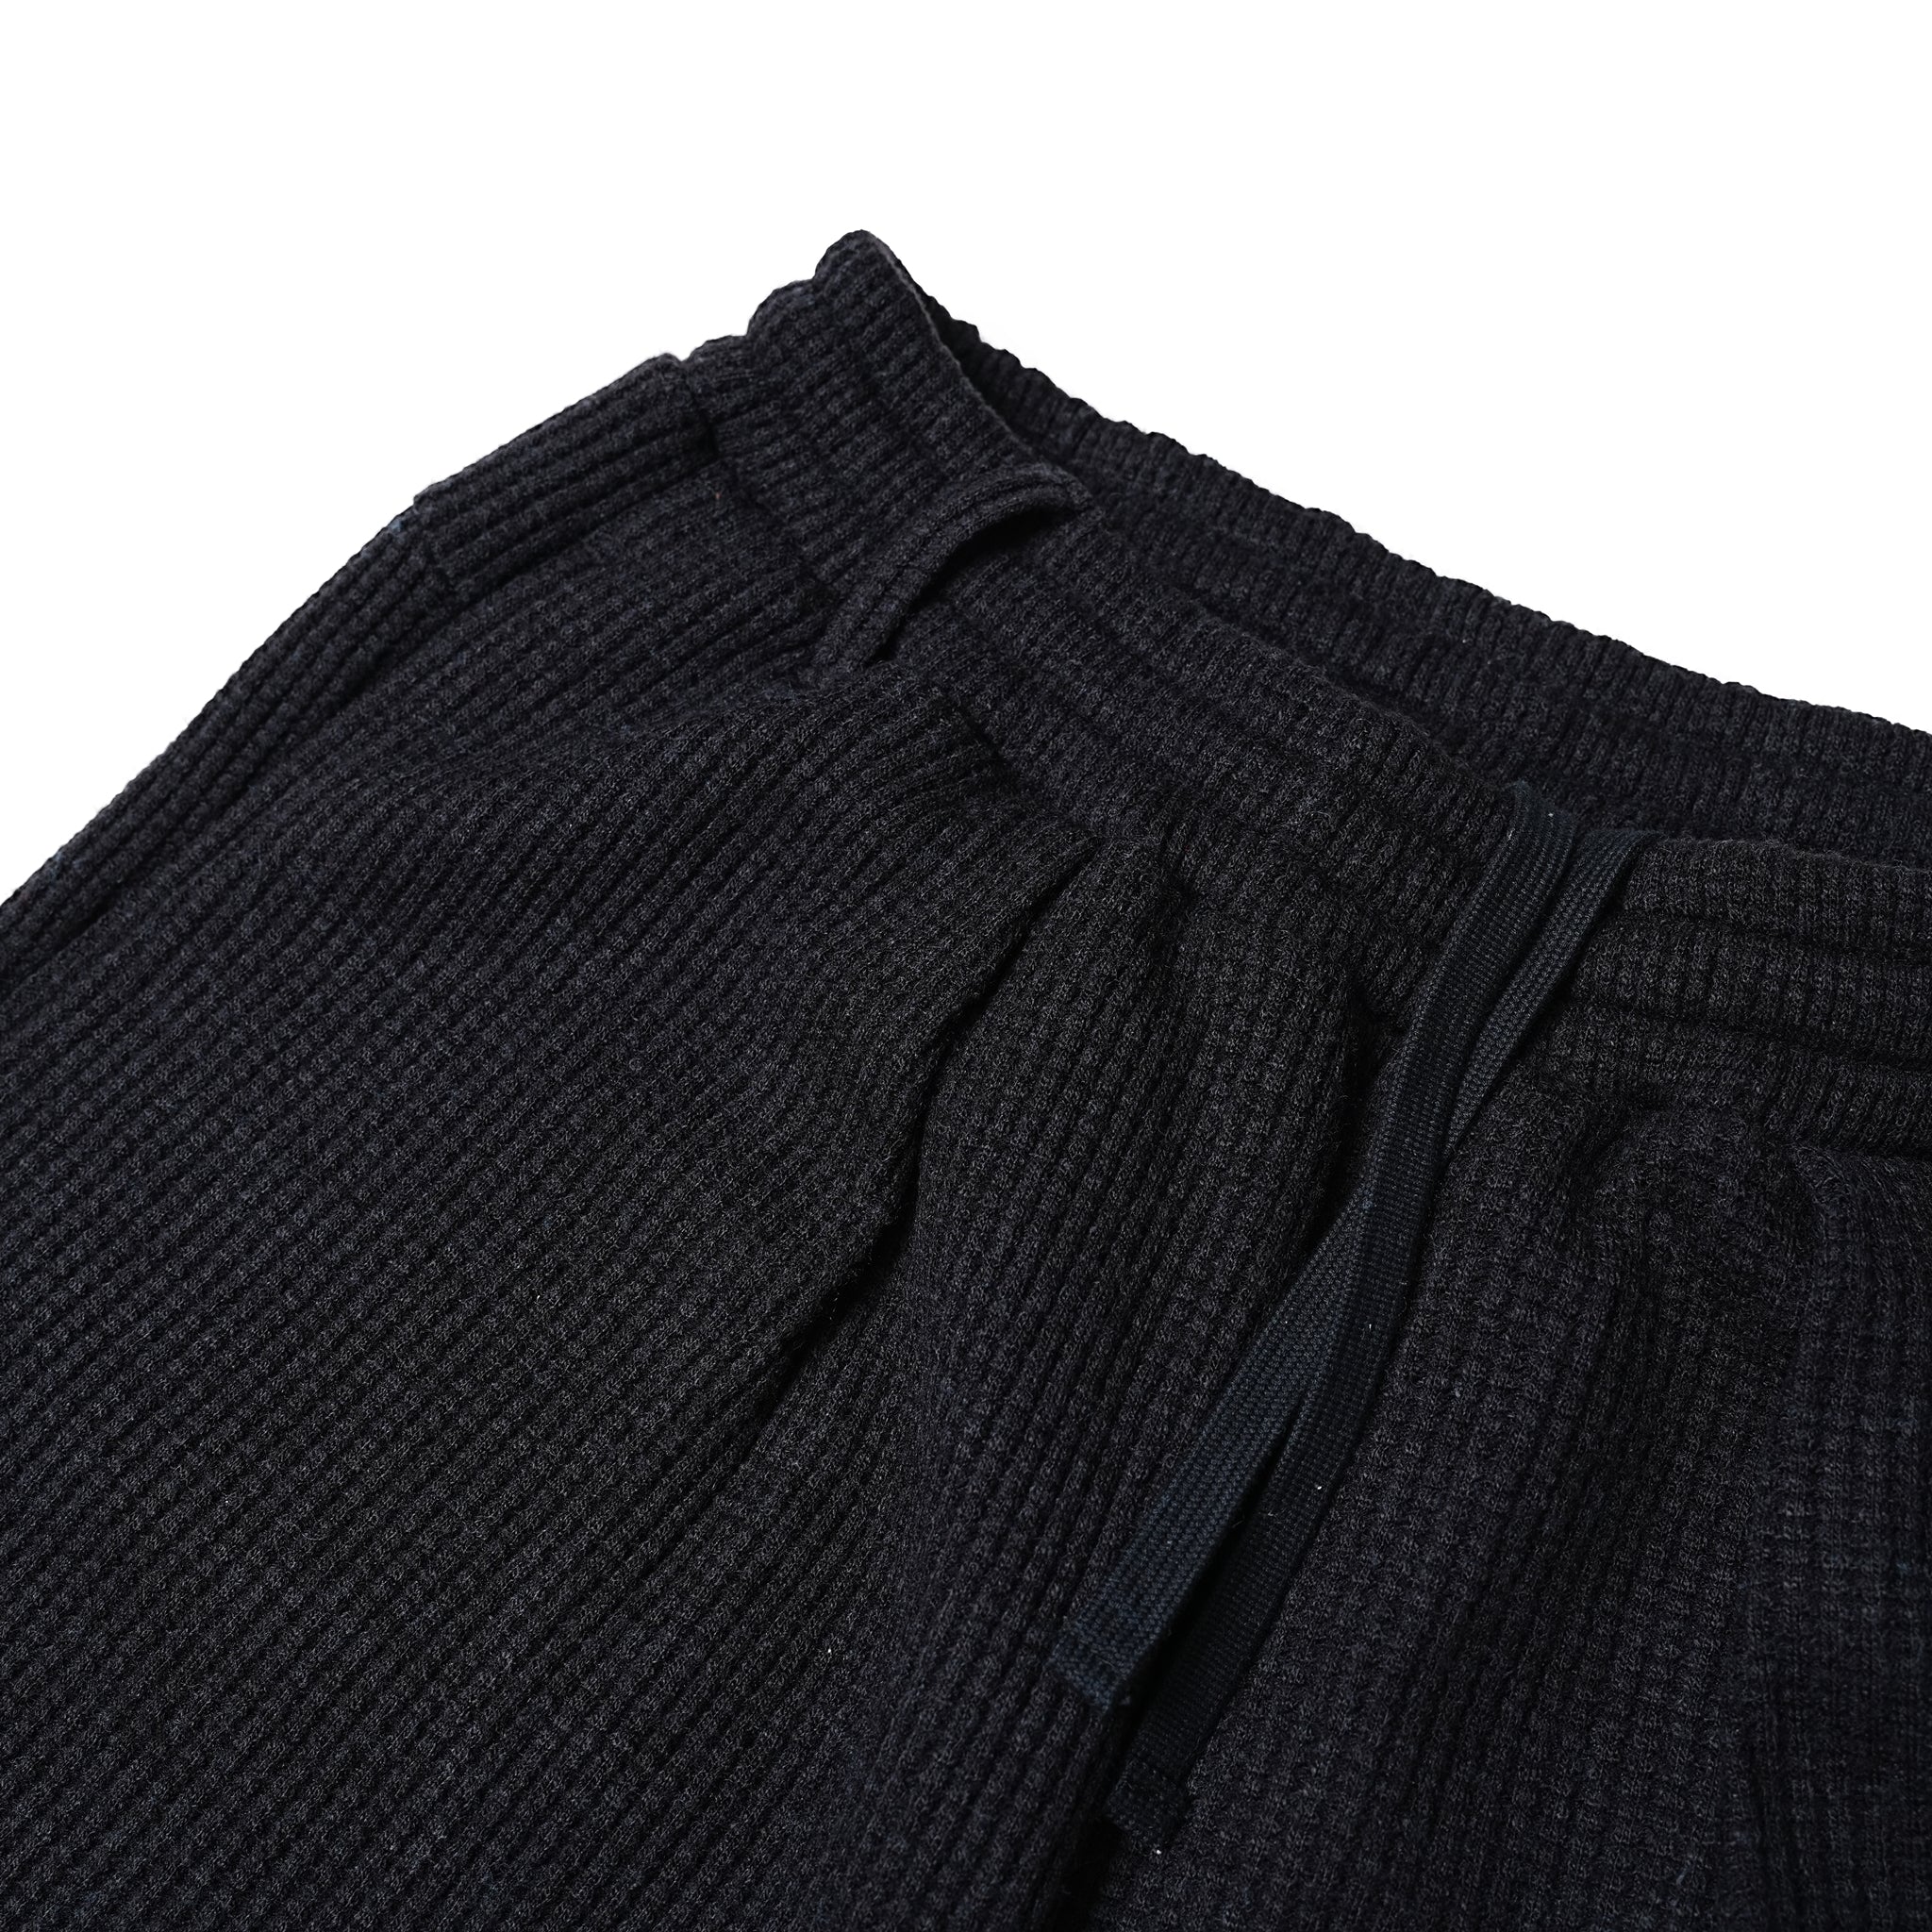 No:VOO-1185 | Name:WAFFLE SHORTS | Color:Steel/Black【VOO_ヴォー】【入荷予定アイテム・入荷連絡可能】